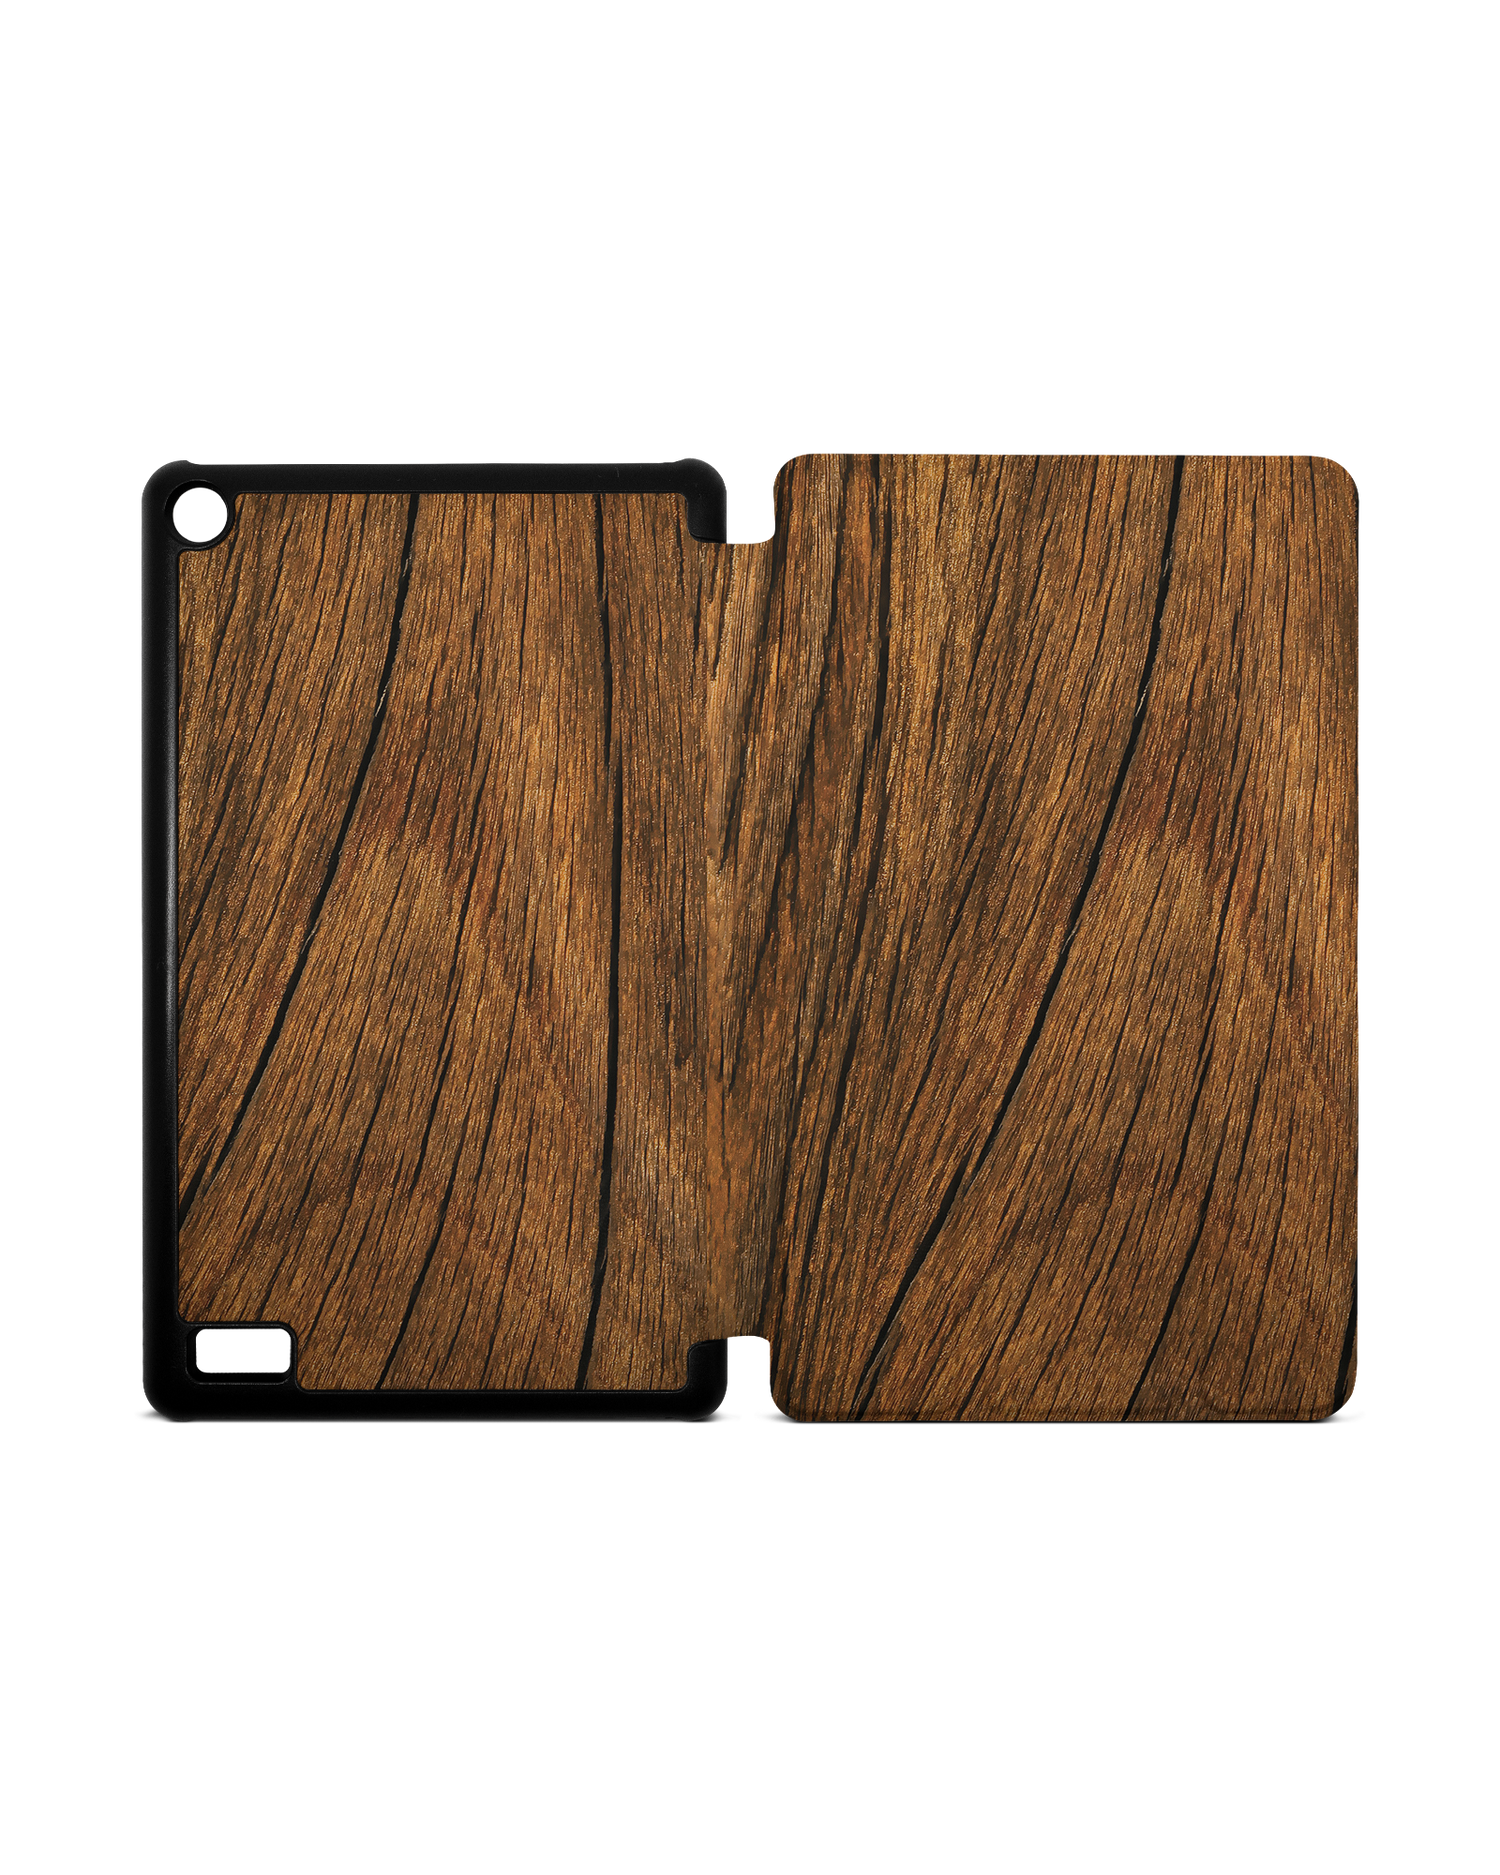 Wood Tablet Smart Case for Amazon Fire 7: Opened